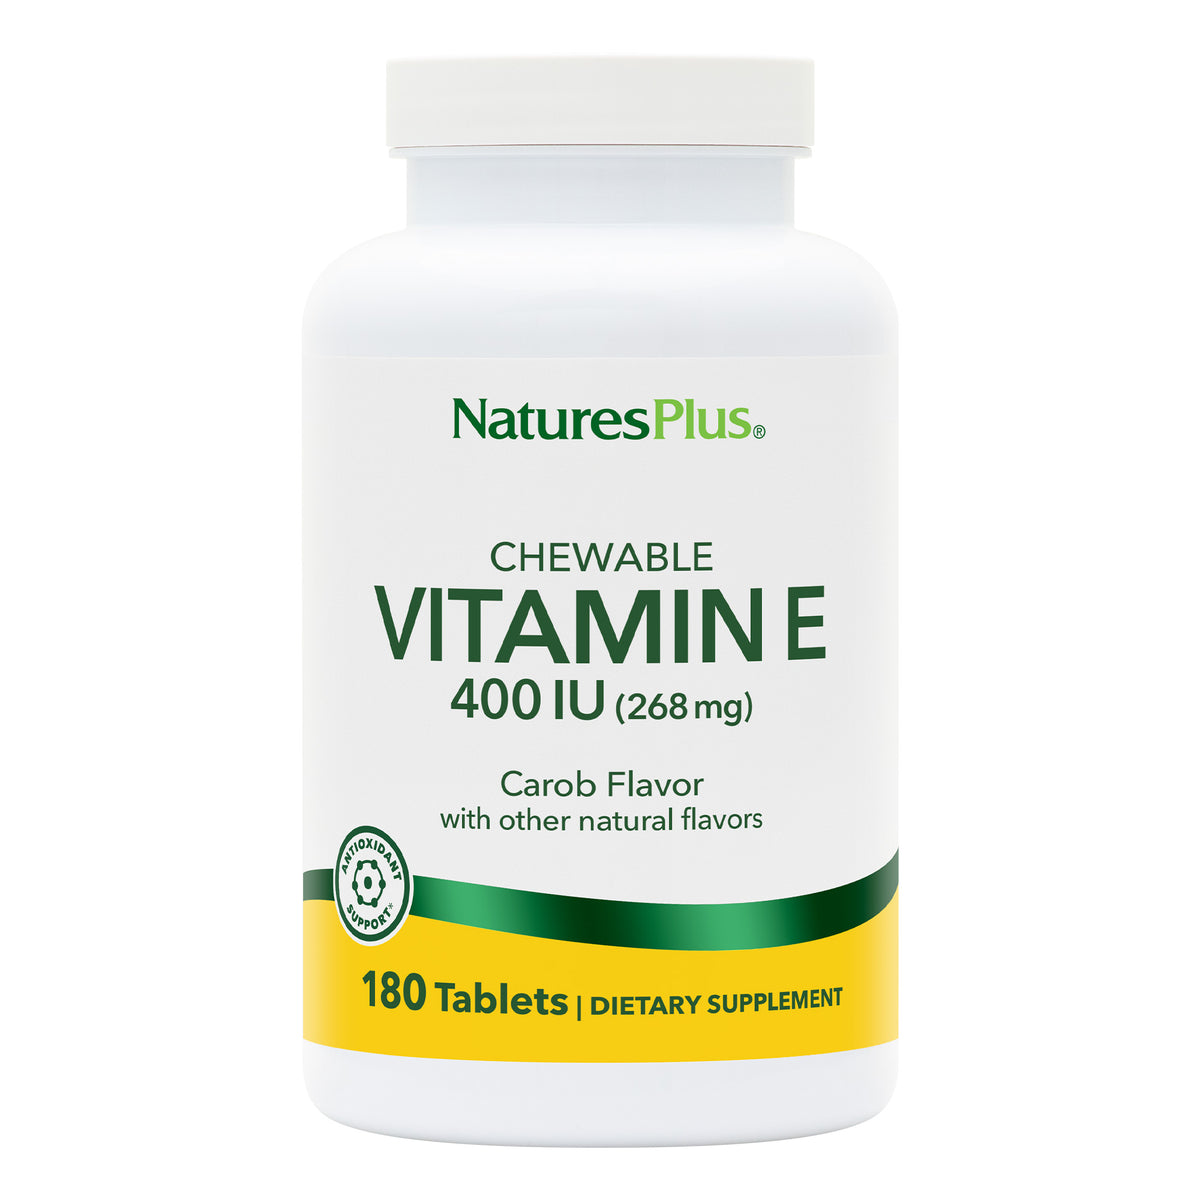 product image of Vitamin E 400 IU Chewables containing 180 Count